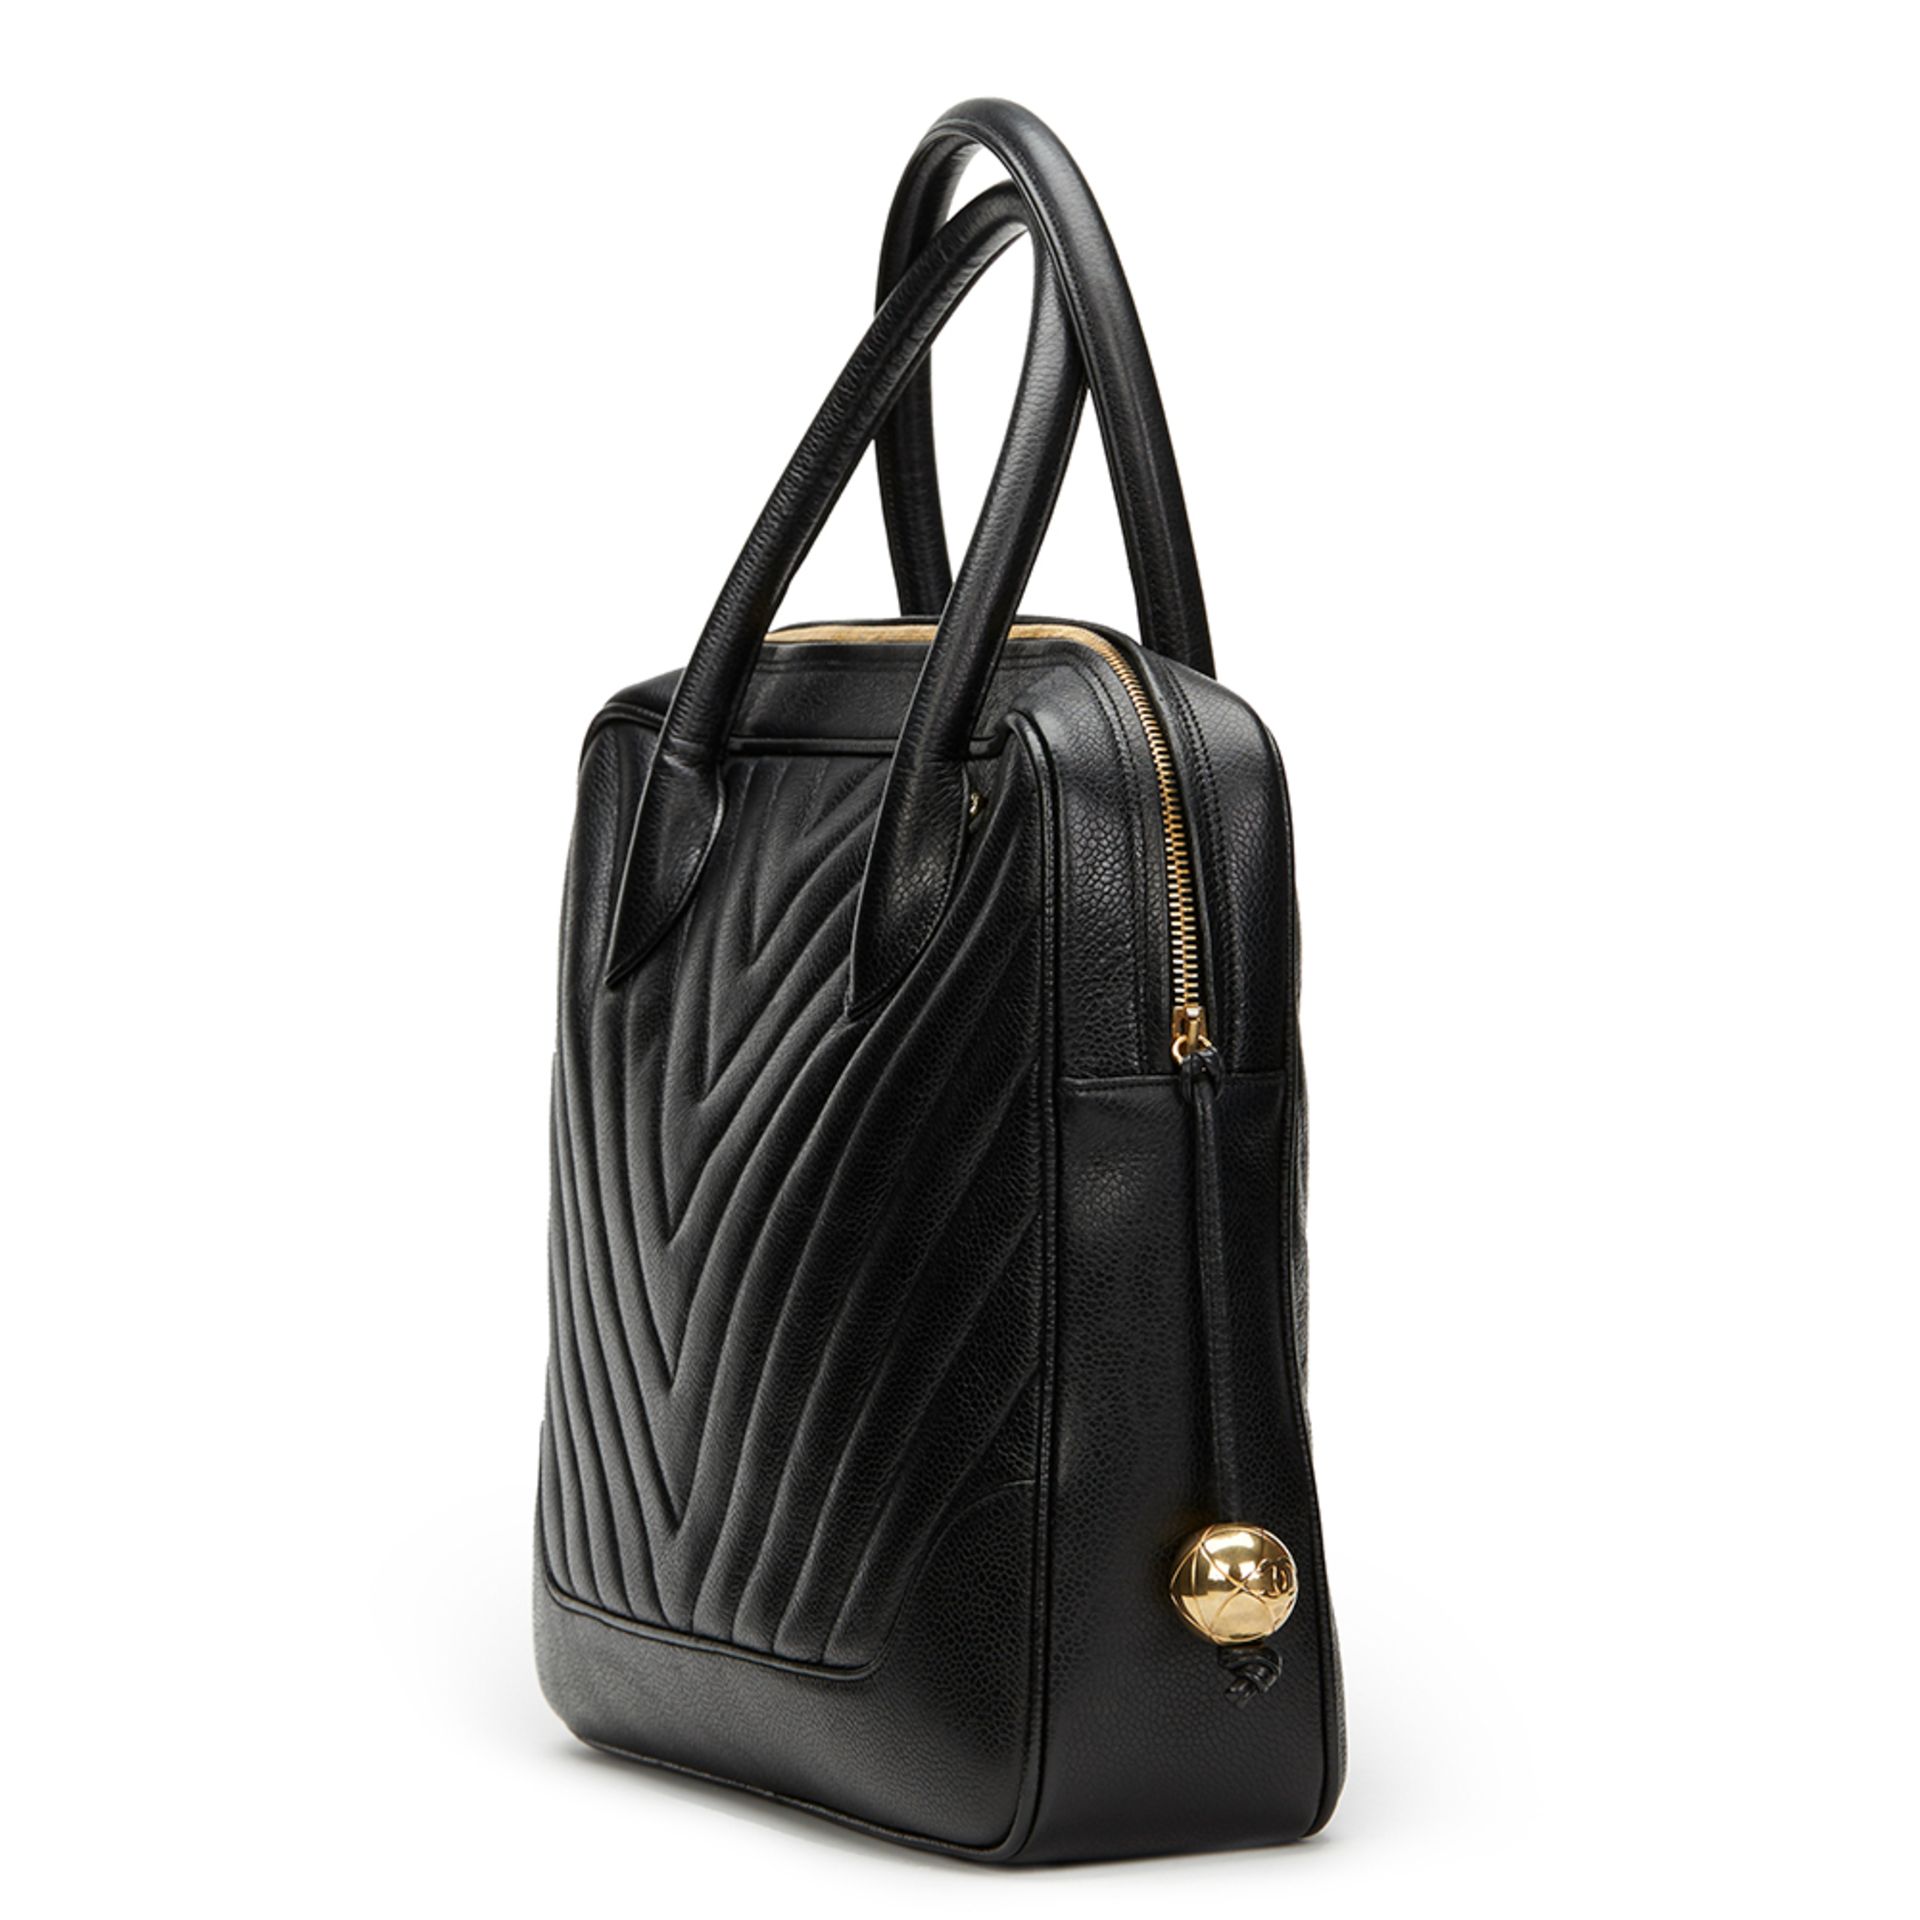 Black Chevron Quilted Caviar Leather 2 Way Shoulder Tote - Image 6 of 9